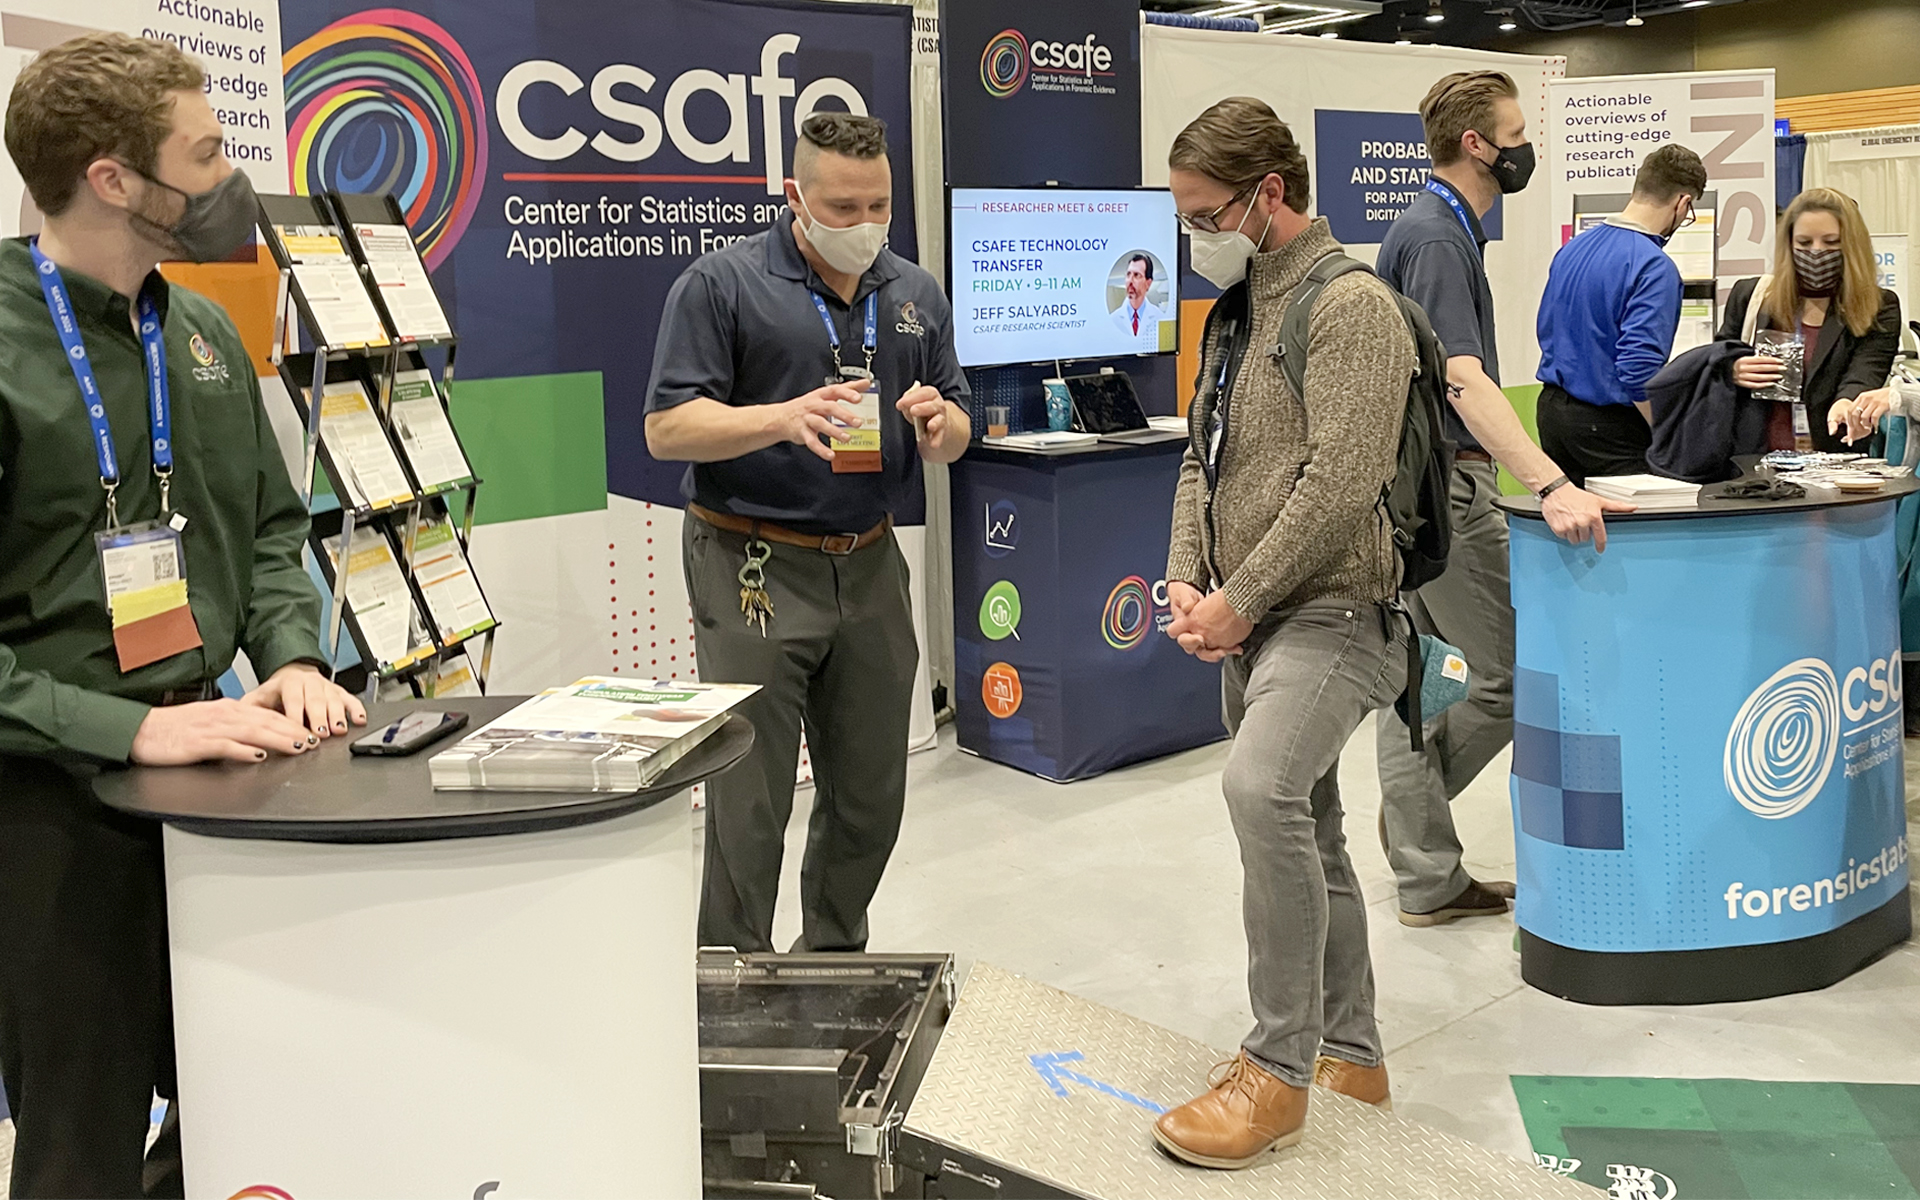 Richard Stone (center) talks with a conference attendee about the functions of the footwear scanner device.